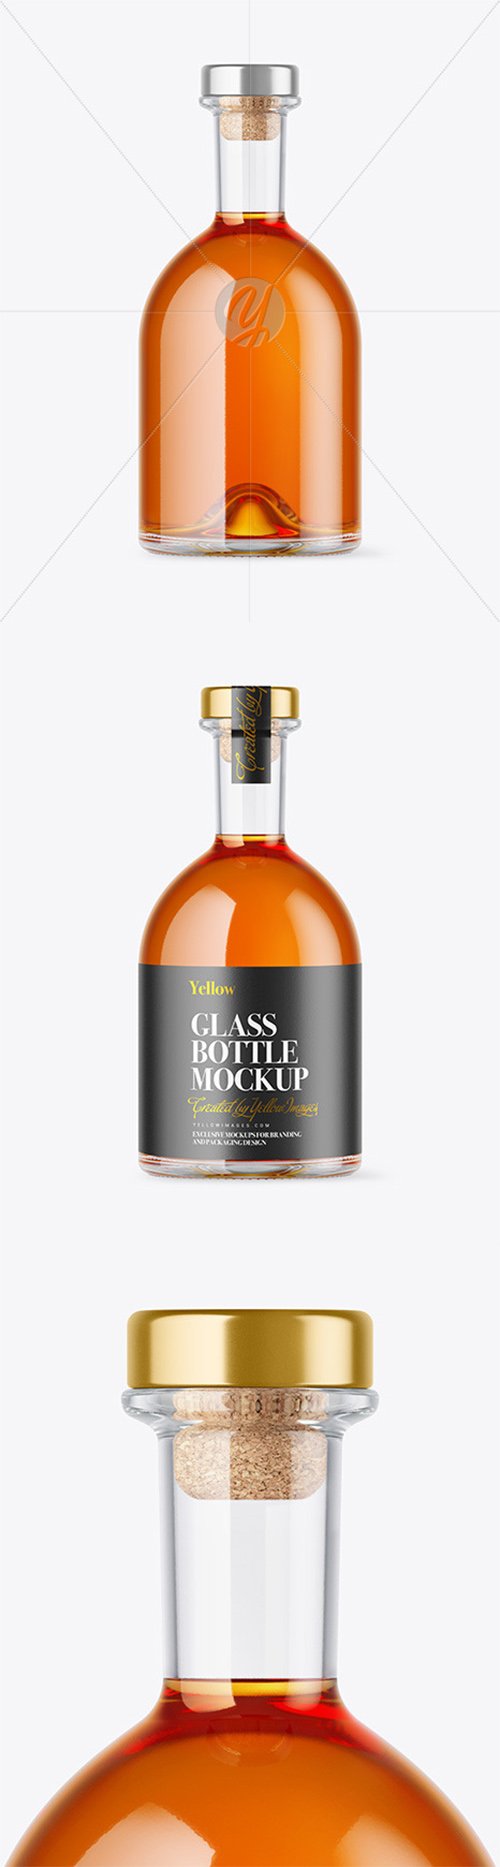 Whiskey Bottle with Wooden Cap Mockup 79689